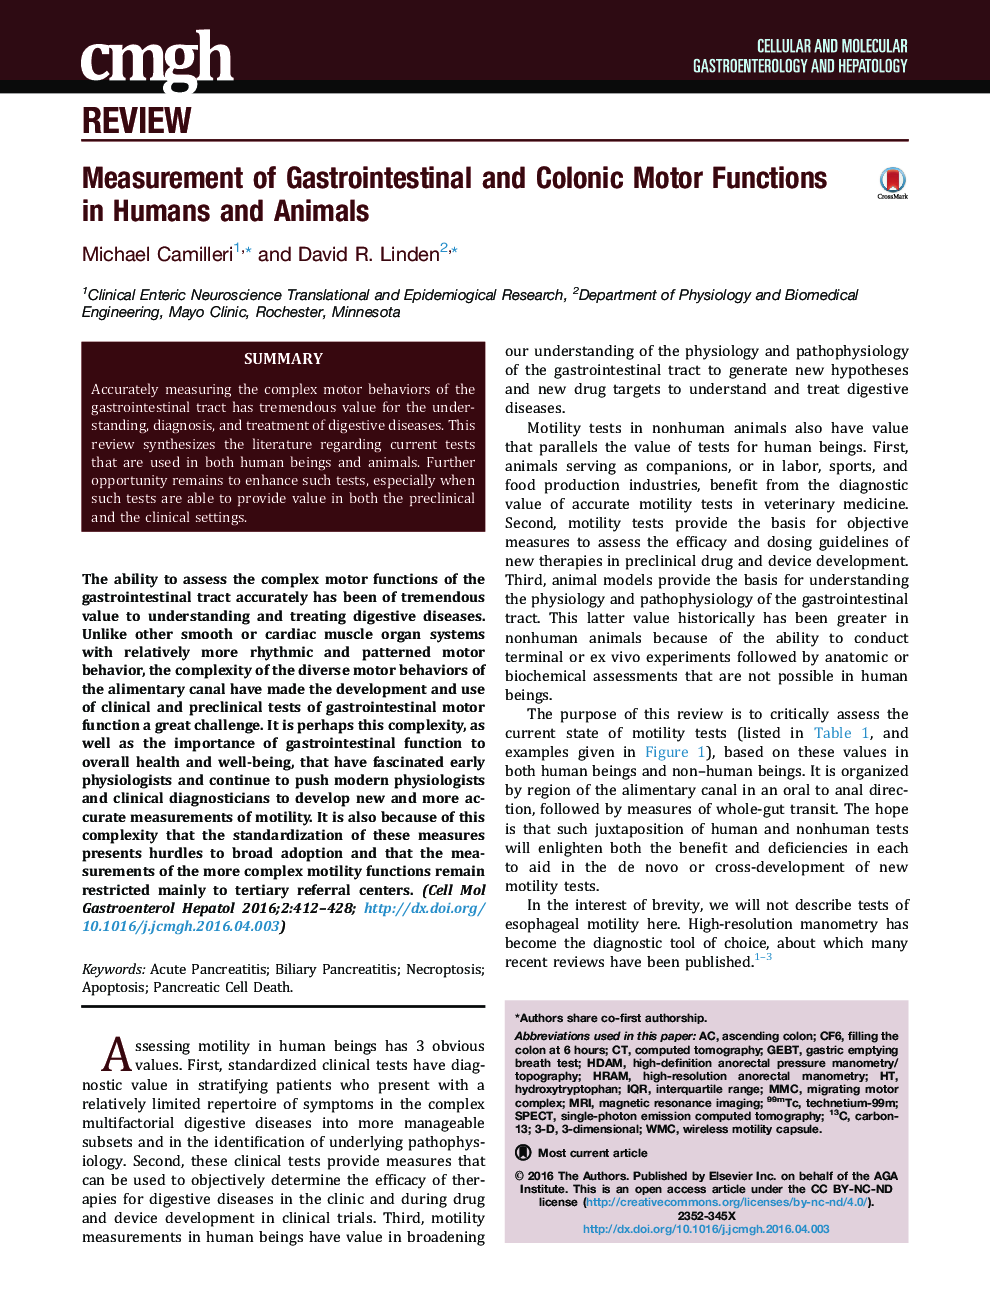 Measurement of Gastrointestinal and Colonic Motor Functions in Humans and Animals 